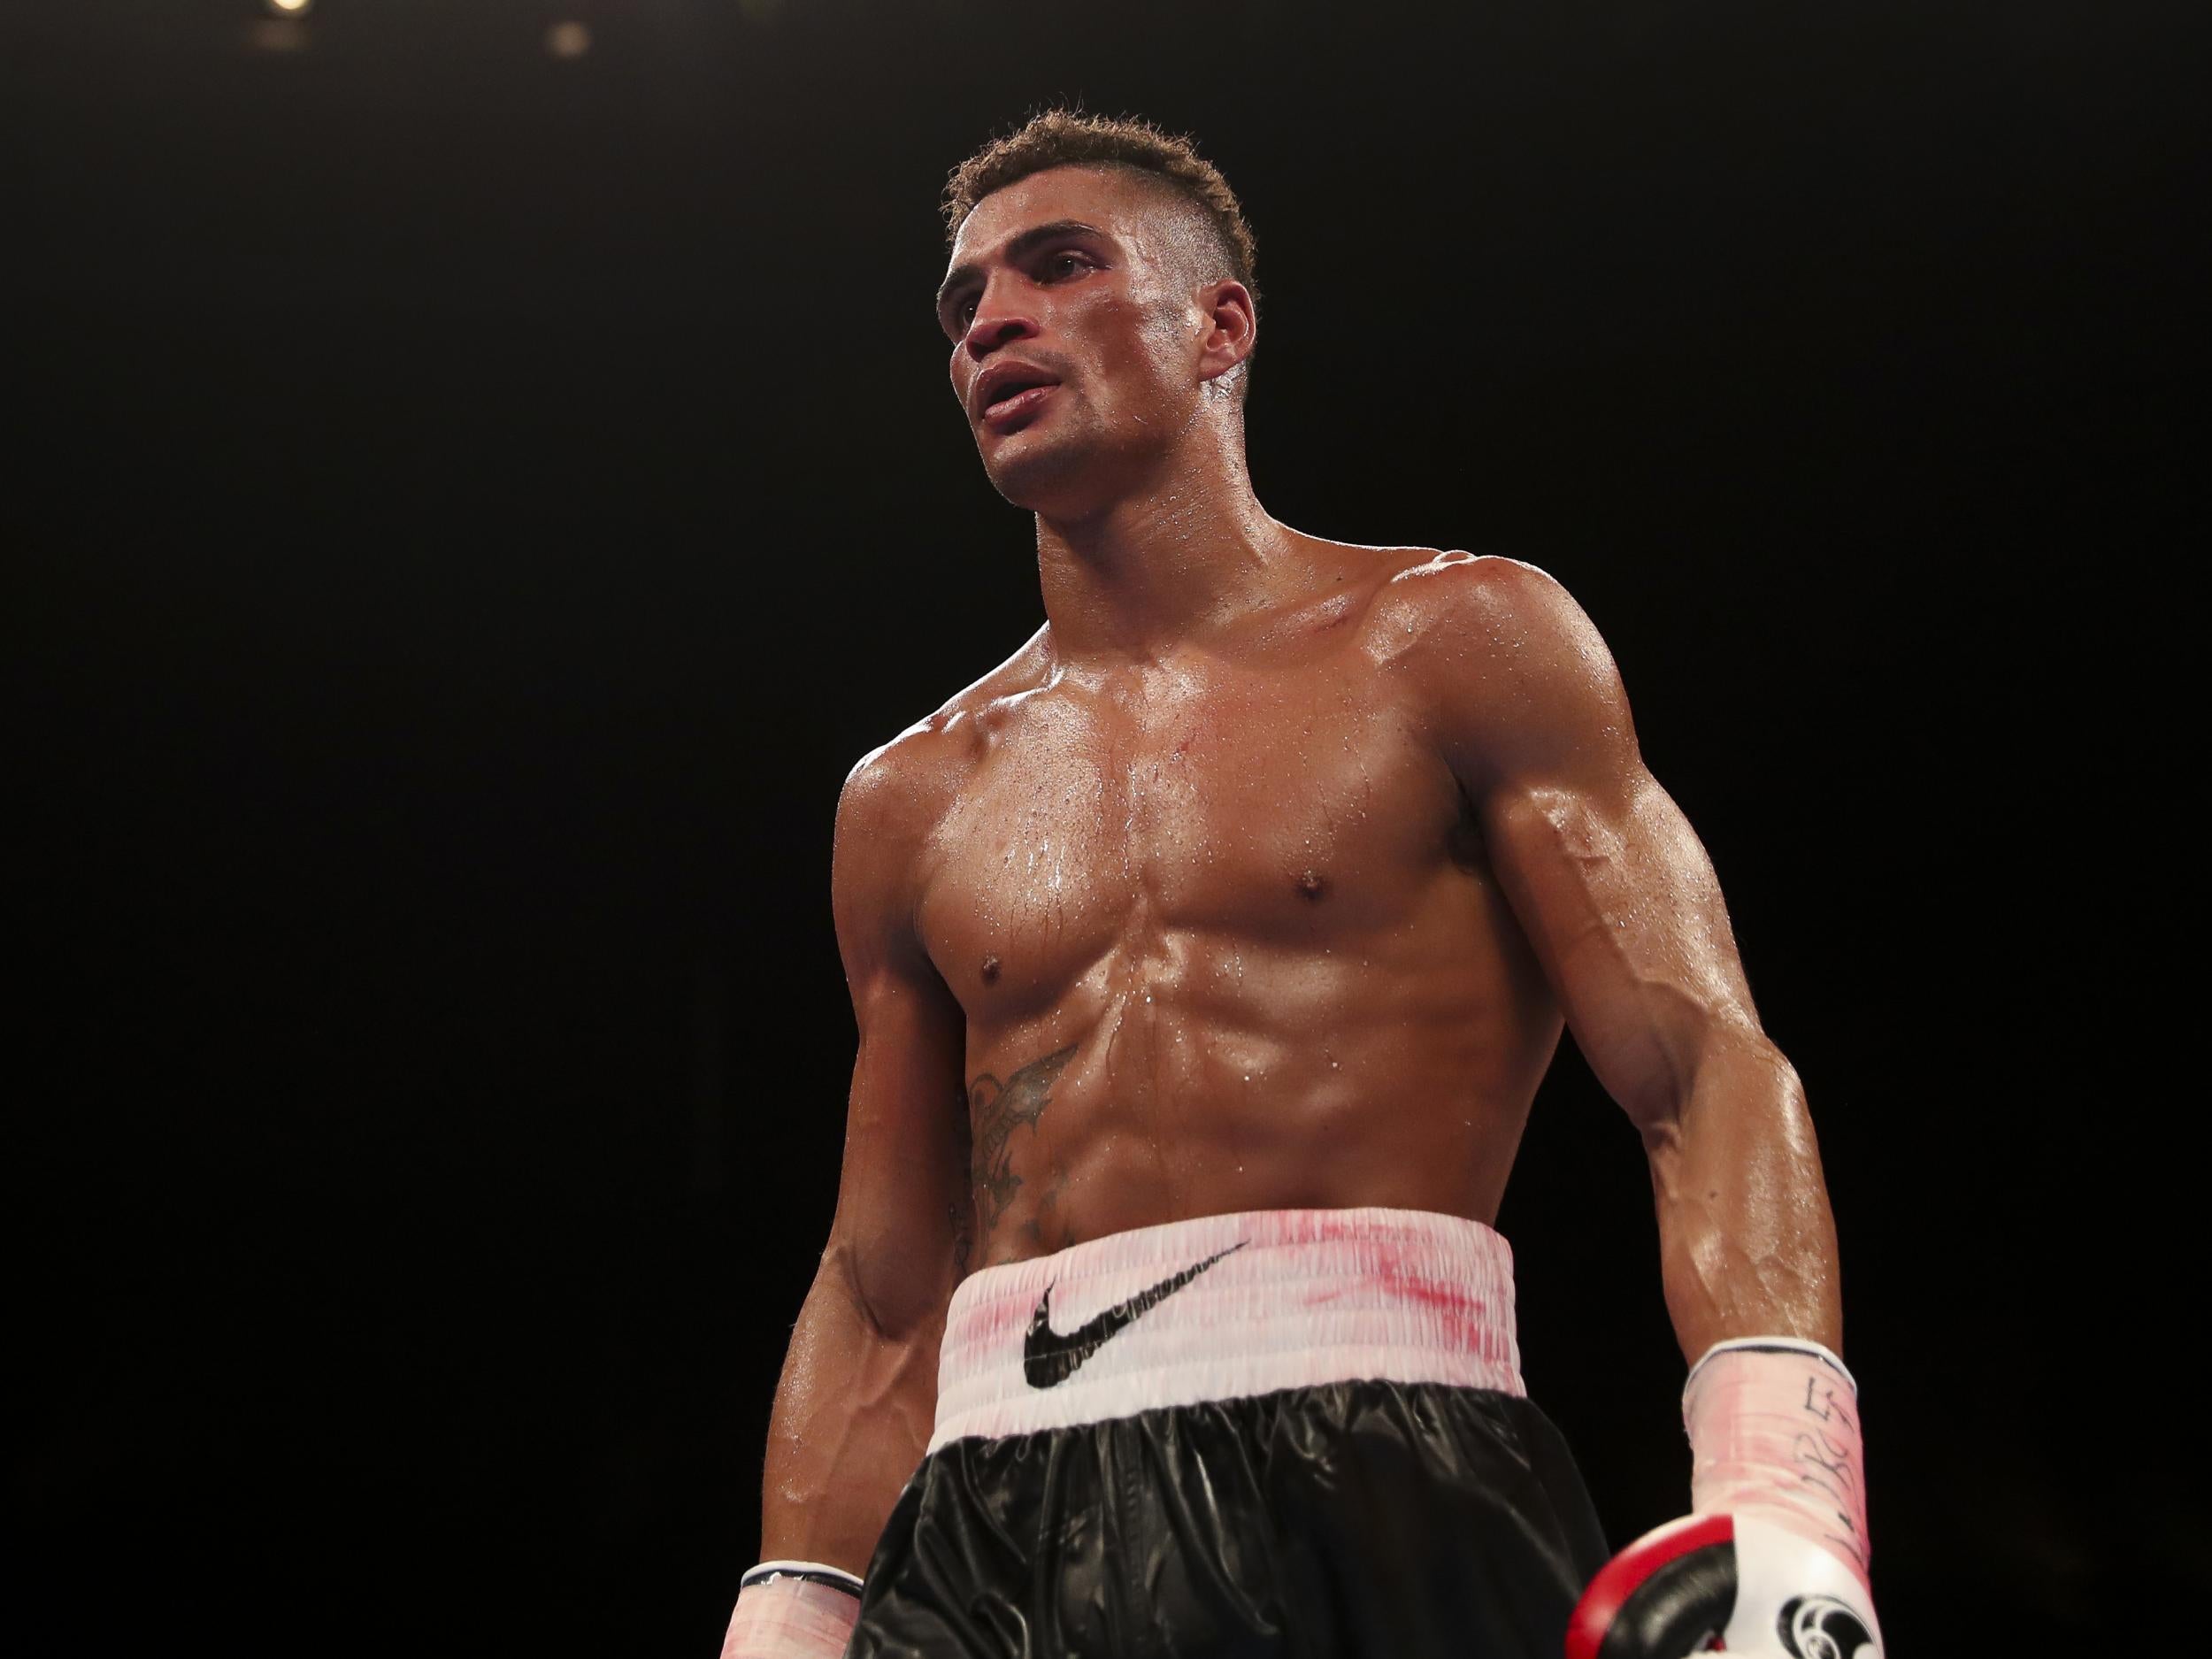 Ogogo's career is in a position of flux after his latest defeat and multiple injuries